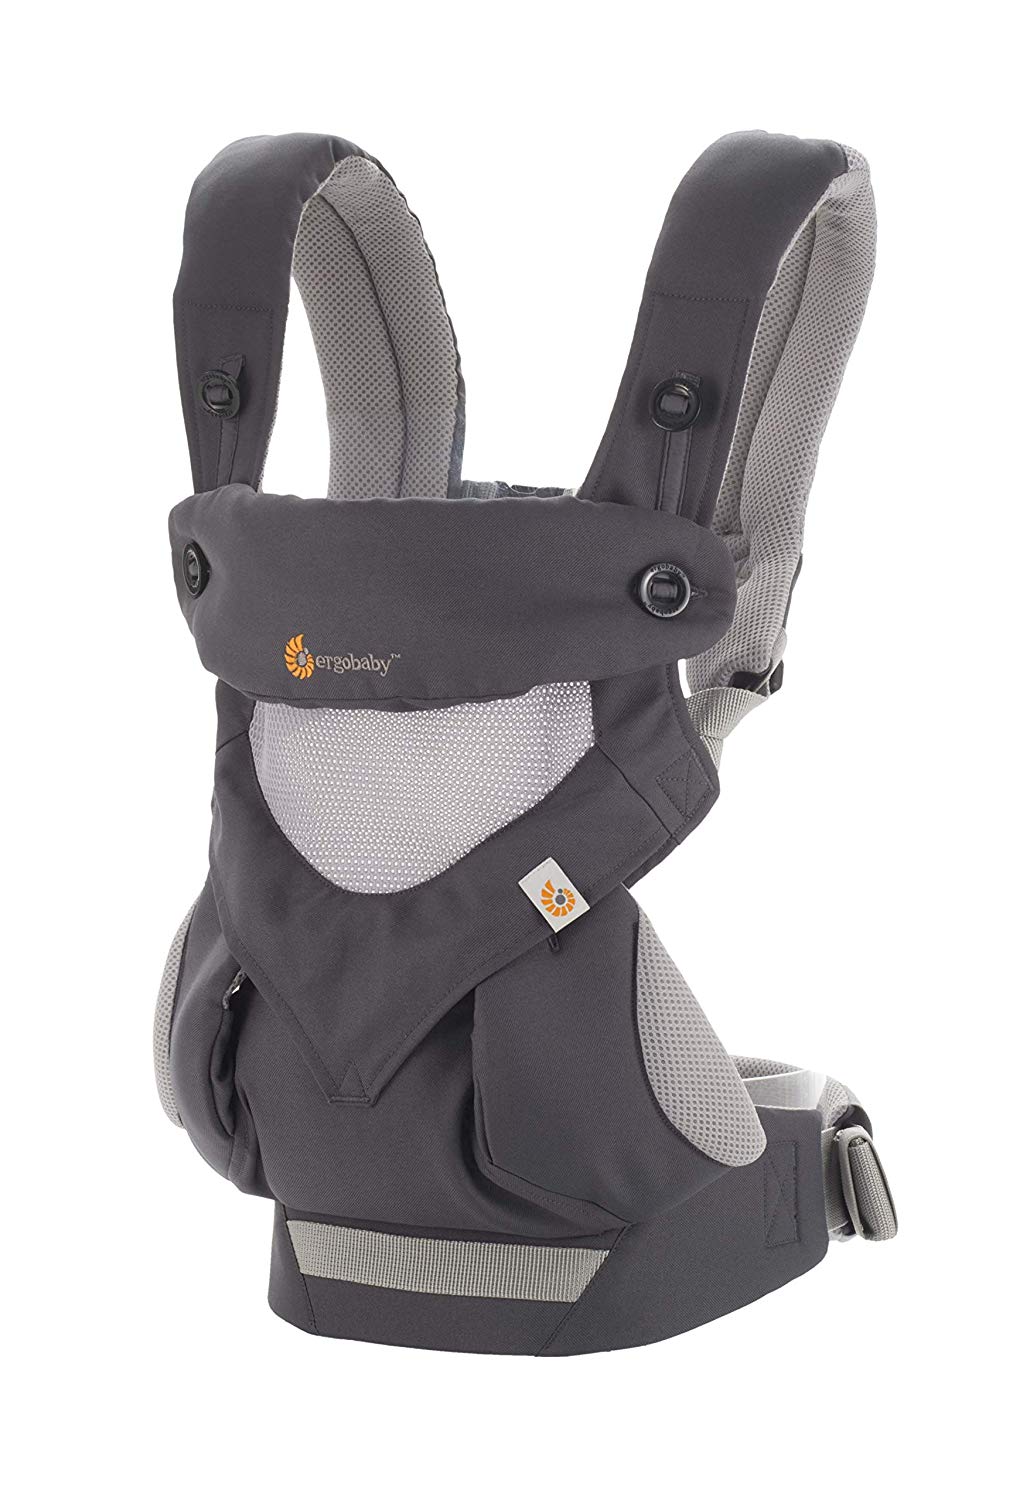 Ergobaby Baby Carrier 360 - Cool Air Carbon Gray, 4-Position Baby Carrying 